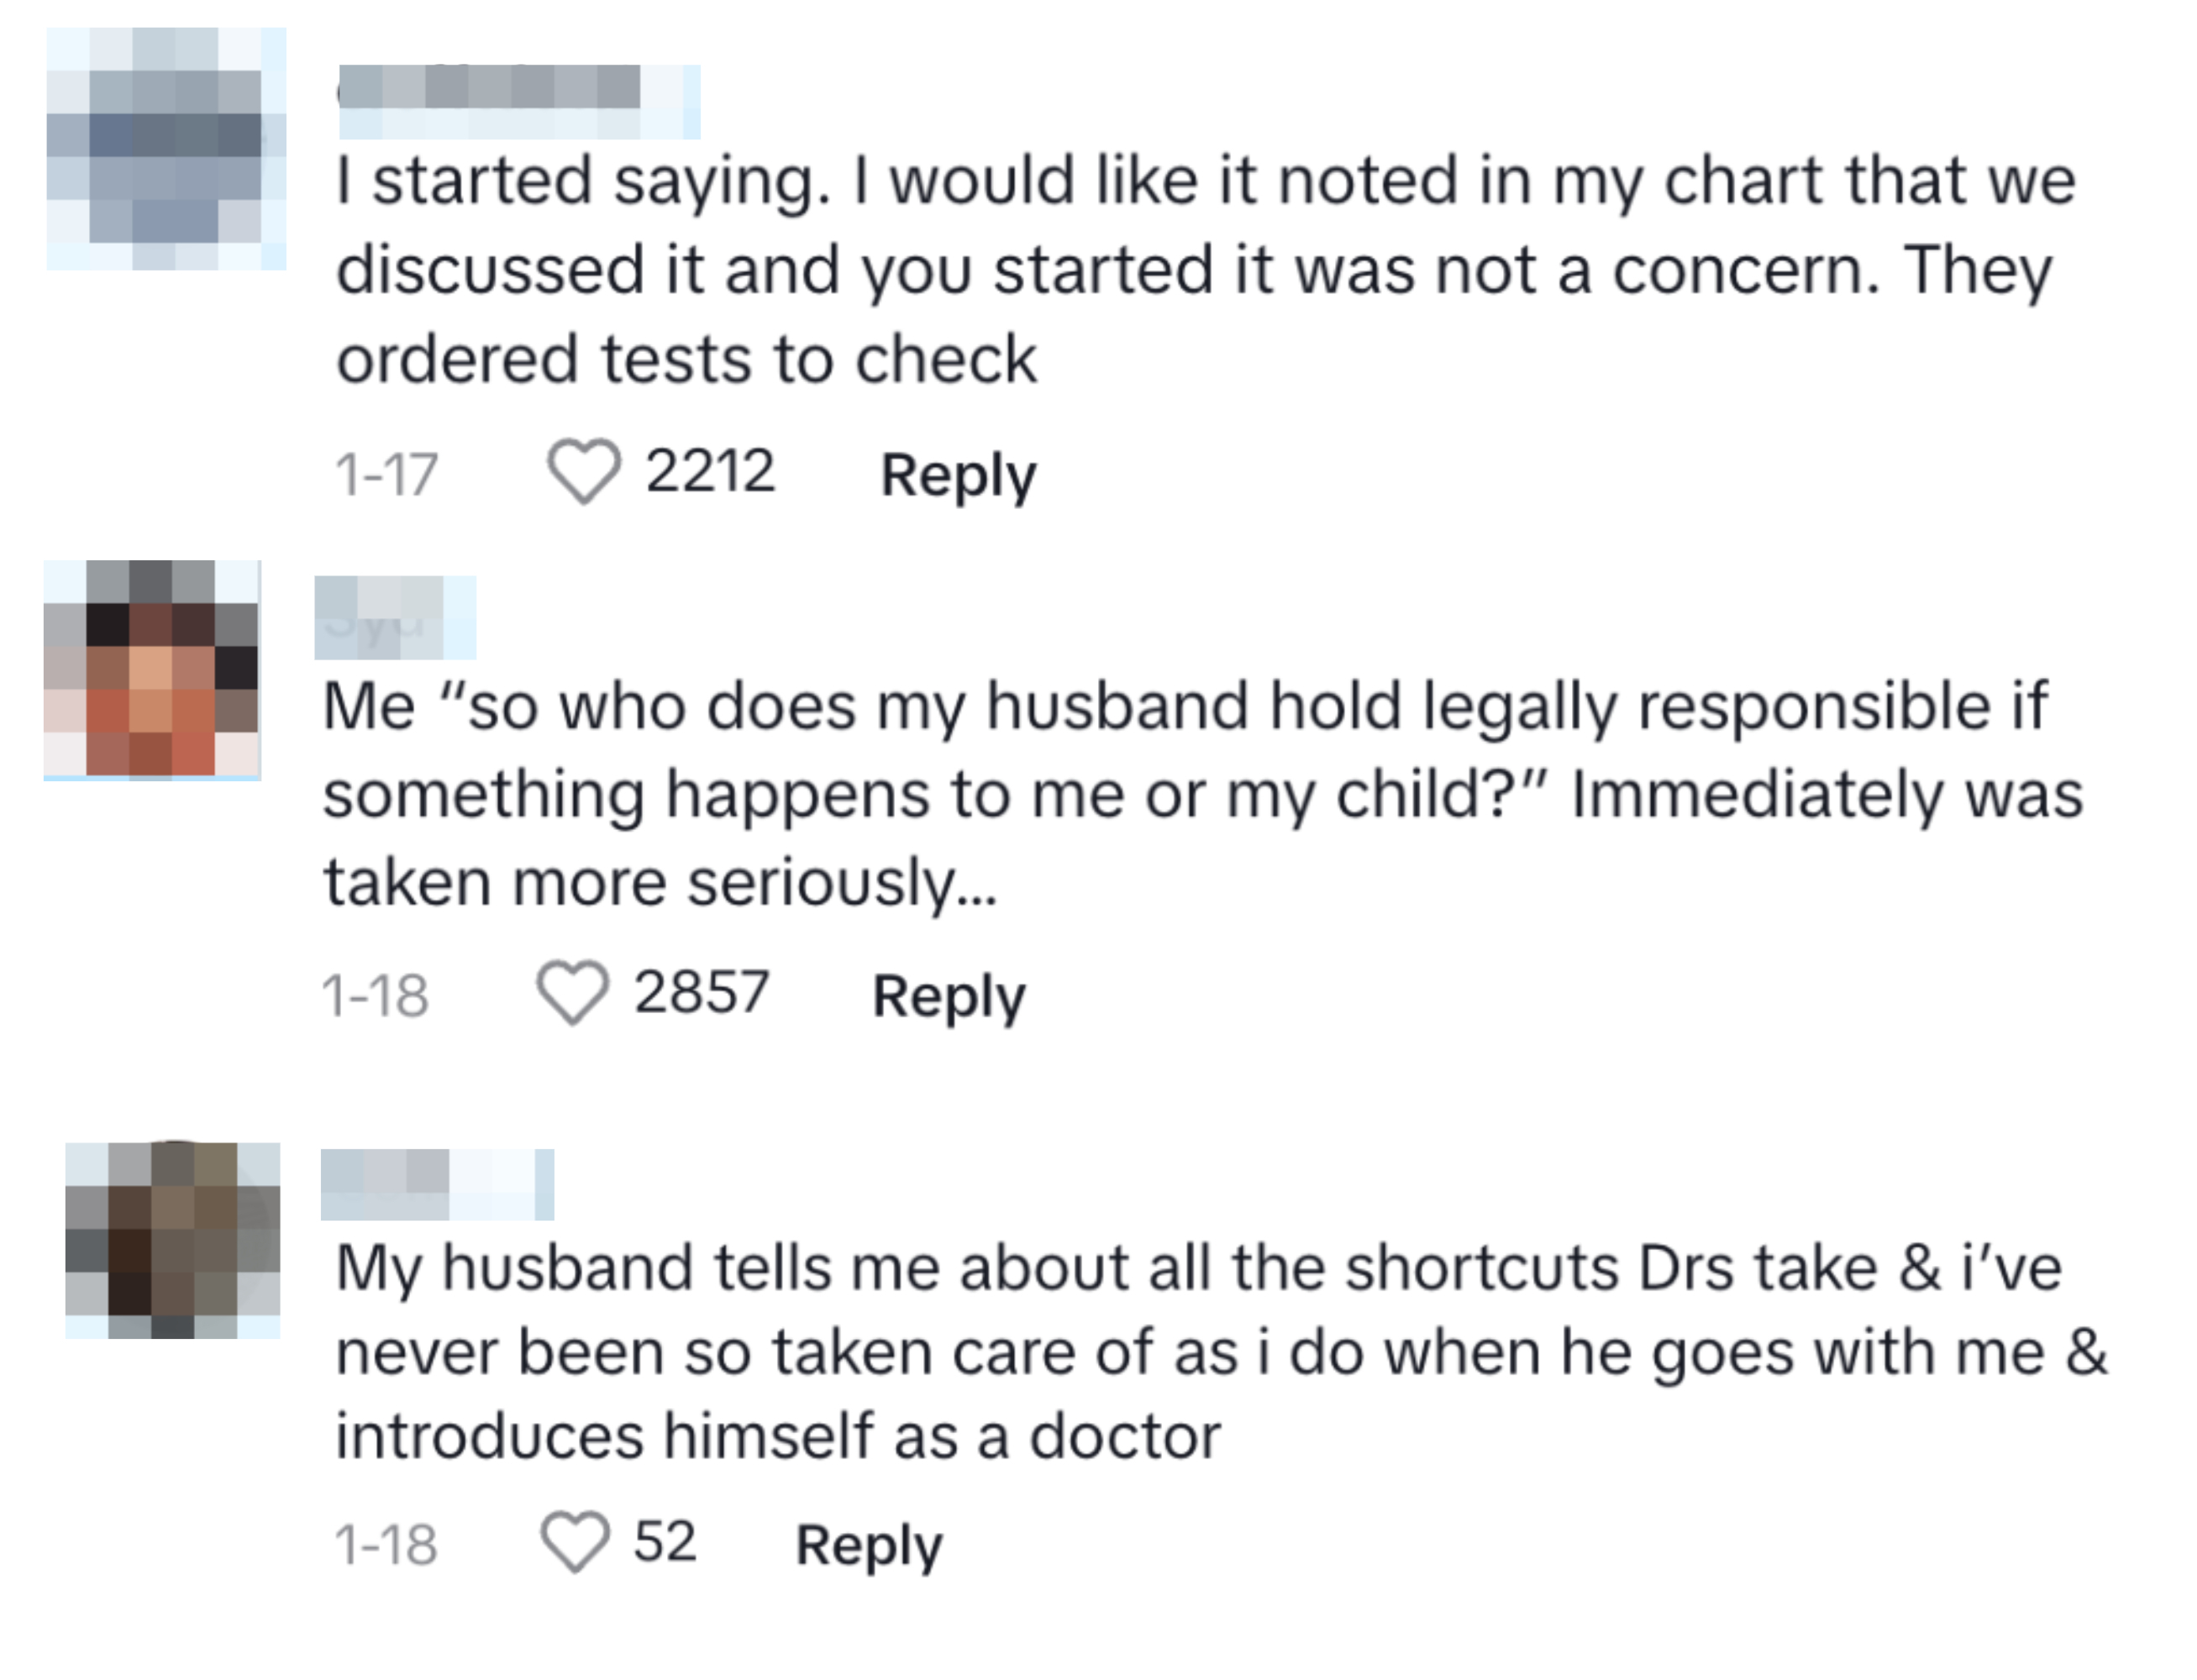 Three comments, including &quot;Me &#x27;so who does my husband hold legally responsible if something happens to me or my child?&#x27; Immediately was taken more seriously&quot;